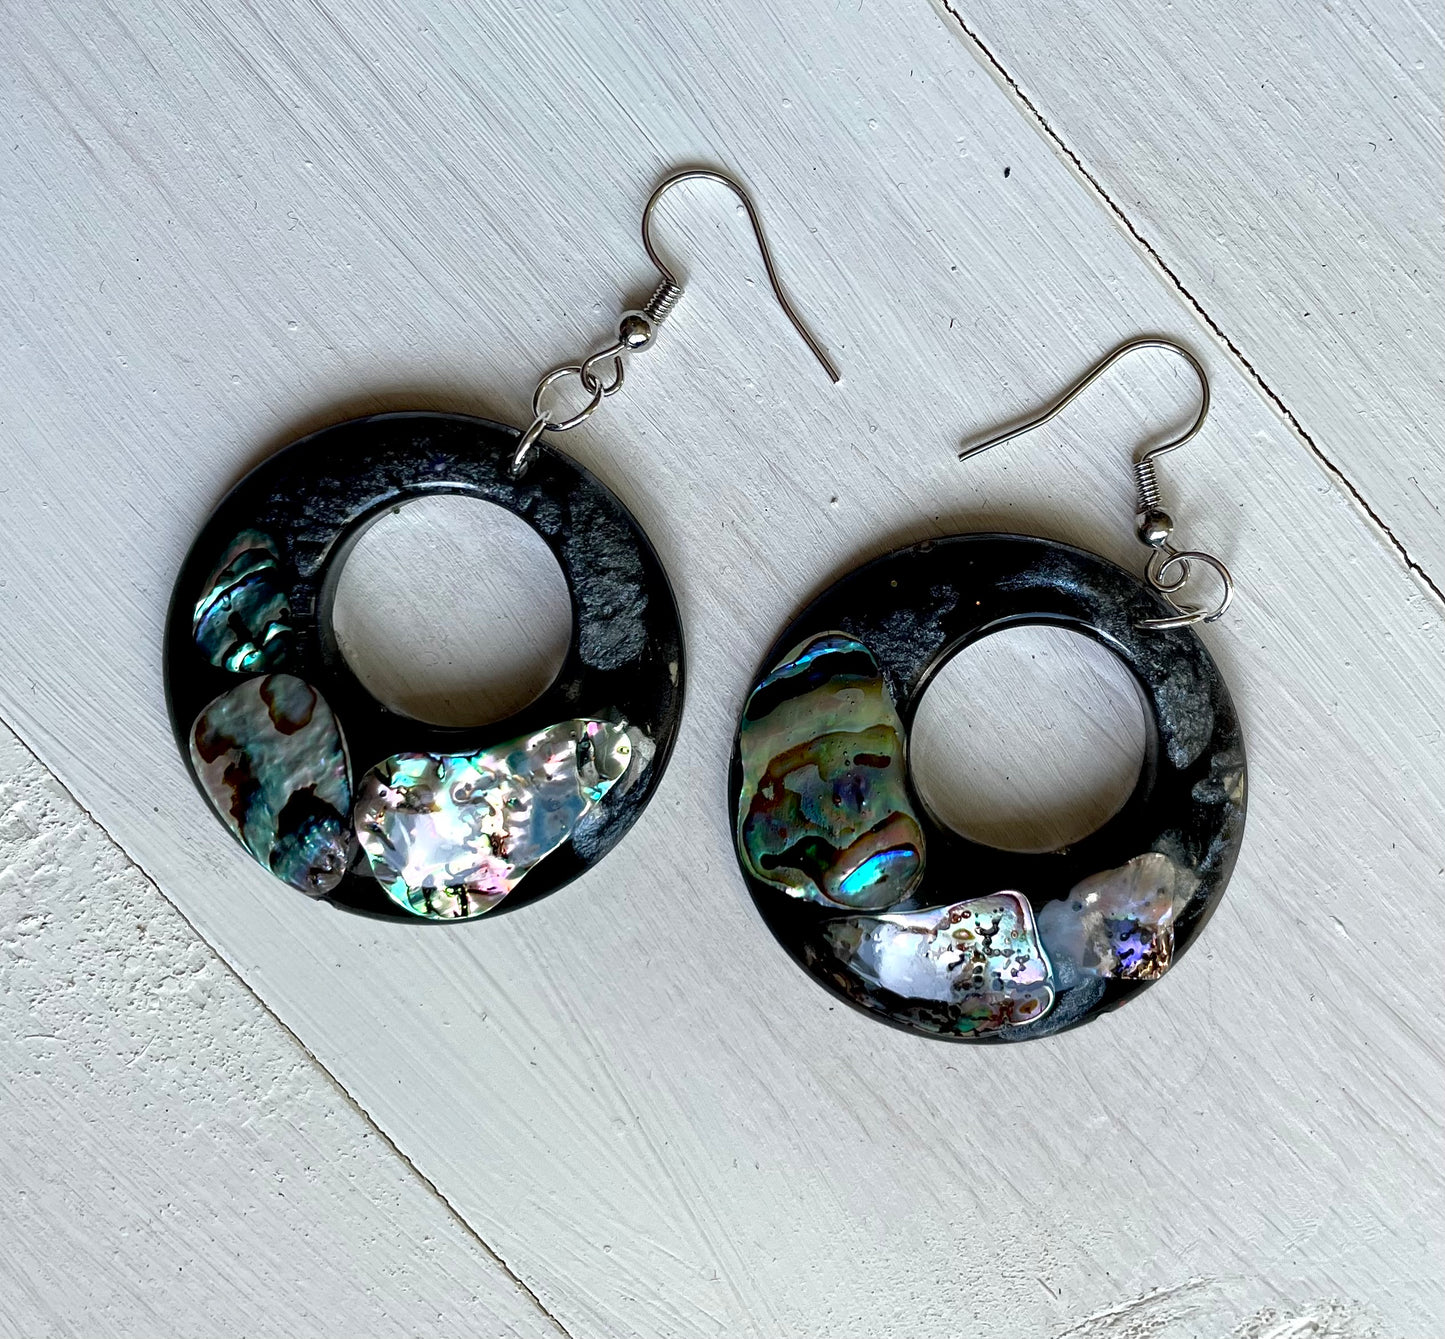 Large round abalone earrings